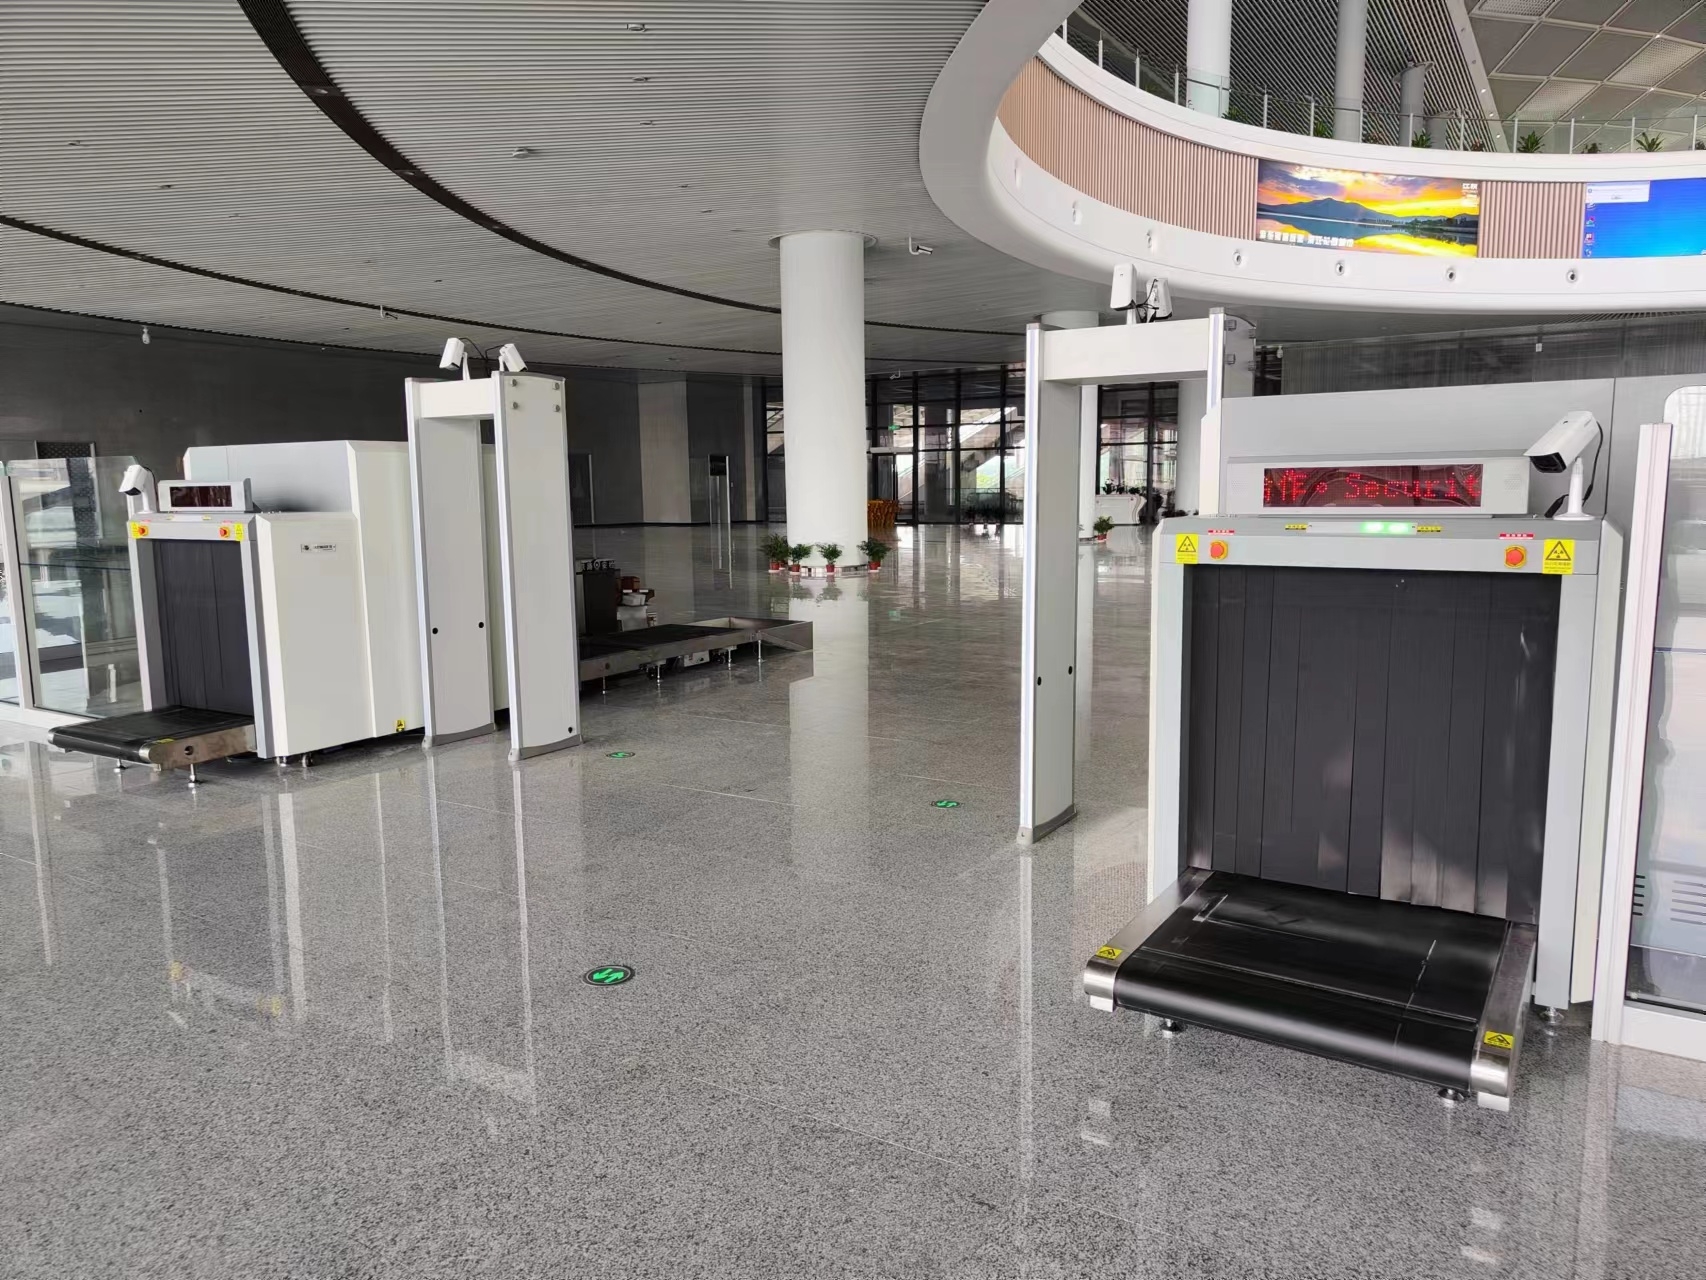 Suzhou high-speed railway station security equipment installation and commissioning completed